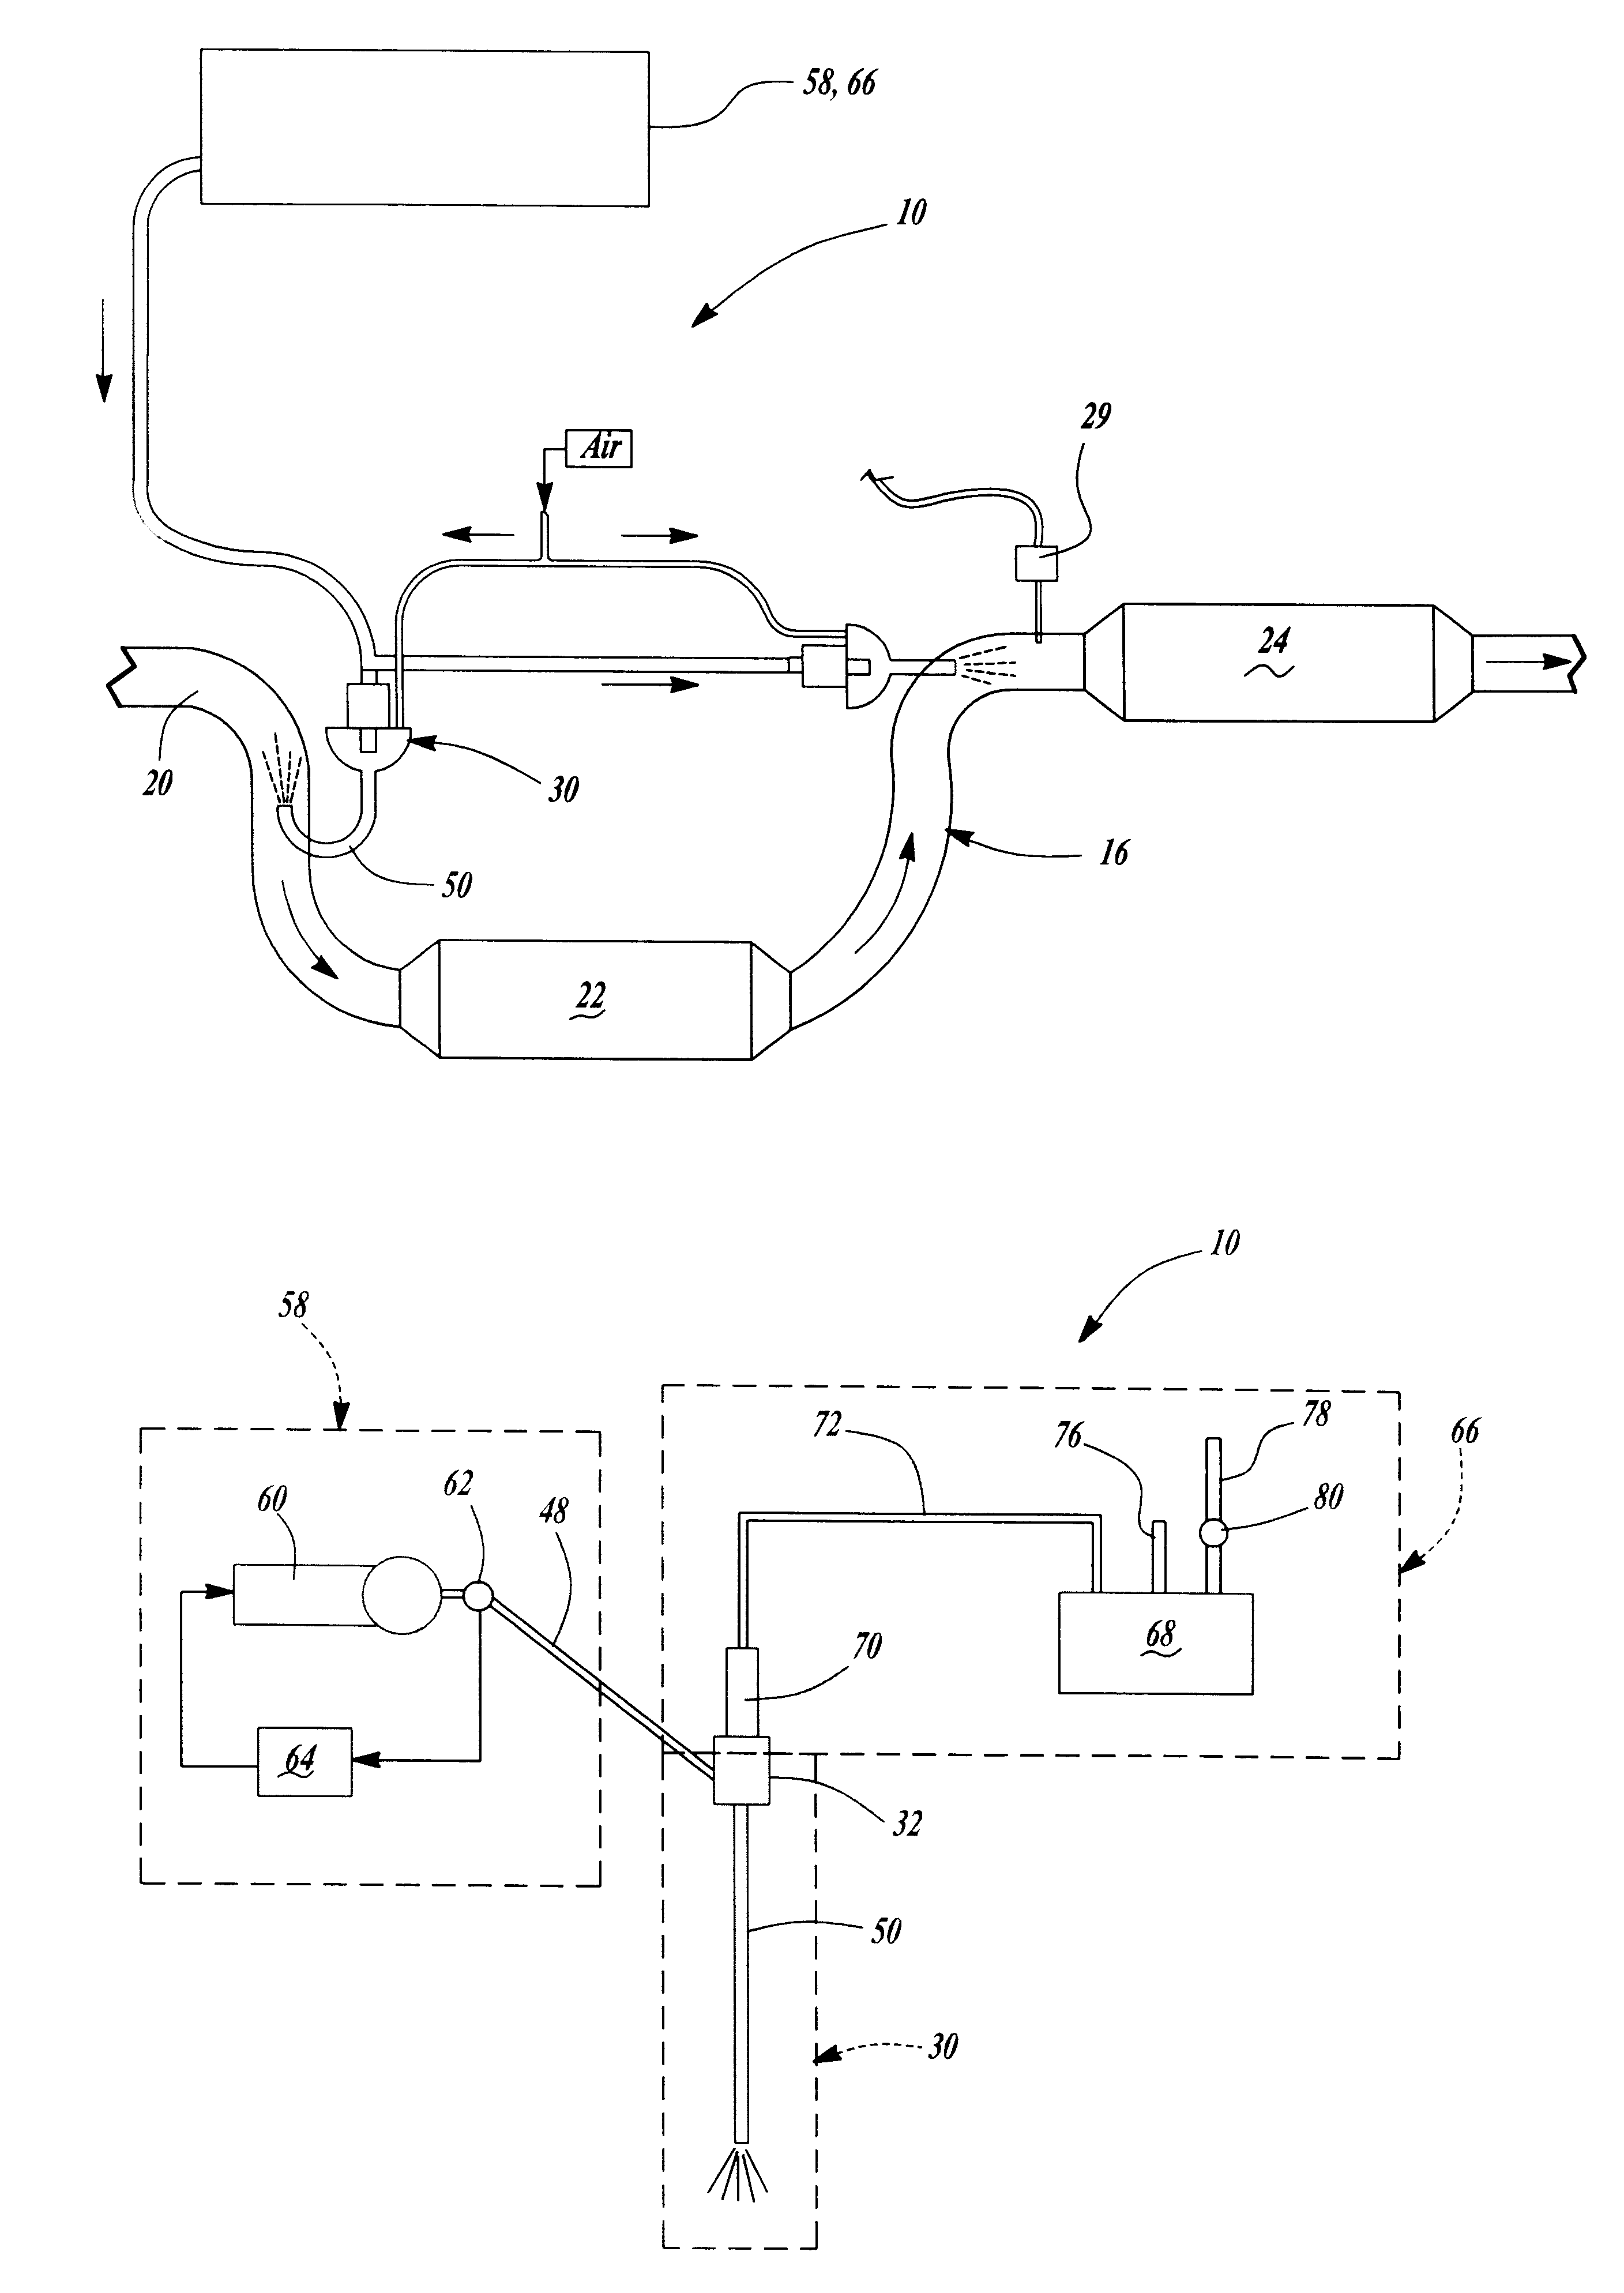 On-board reductant delivery system